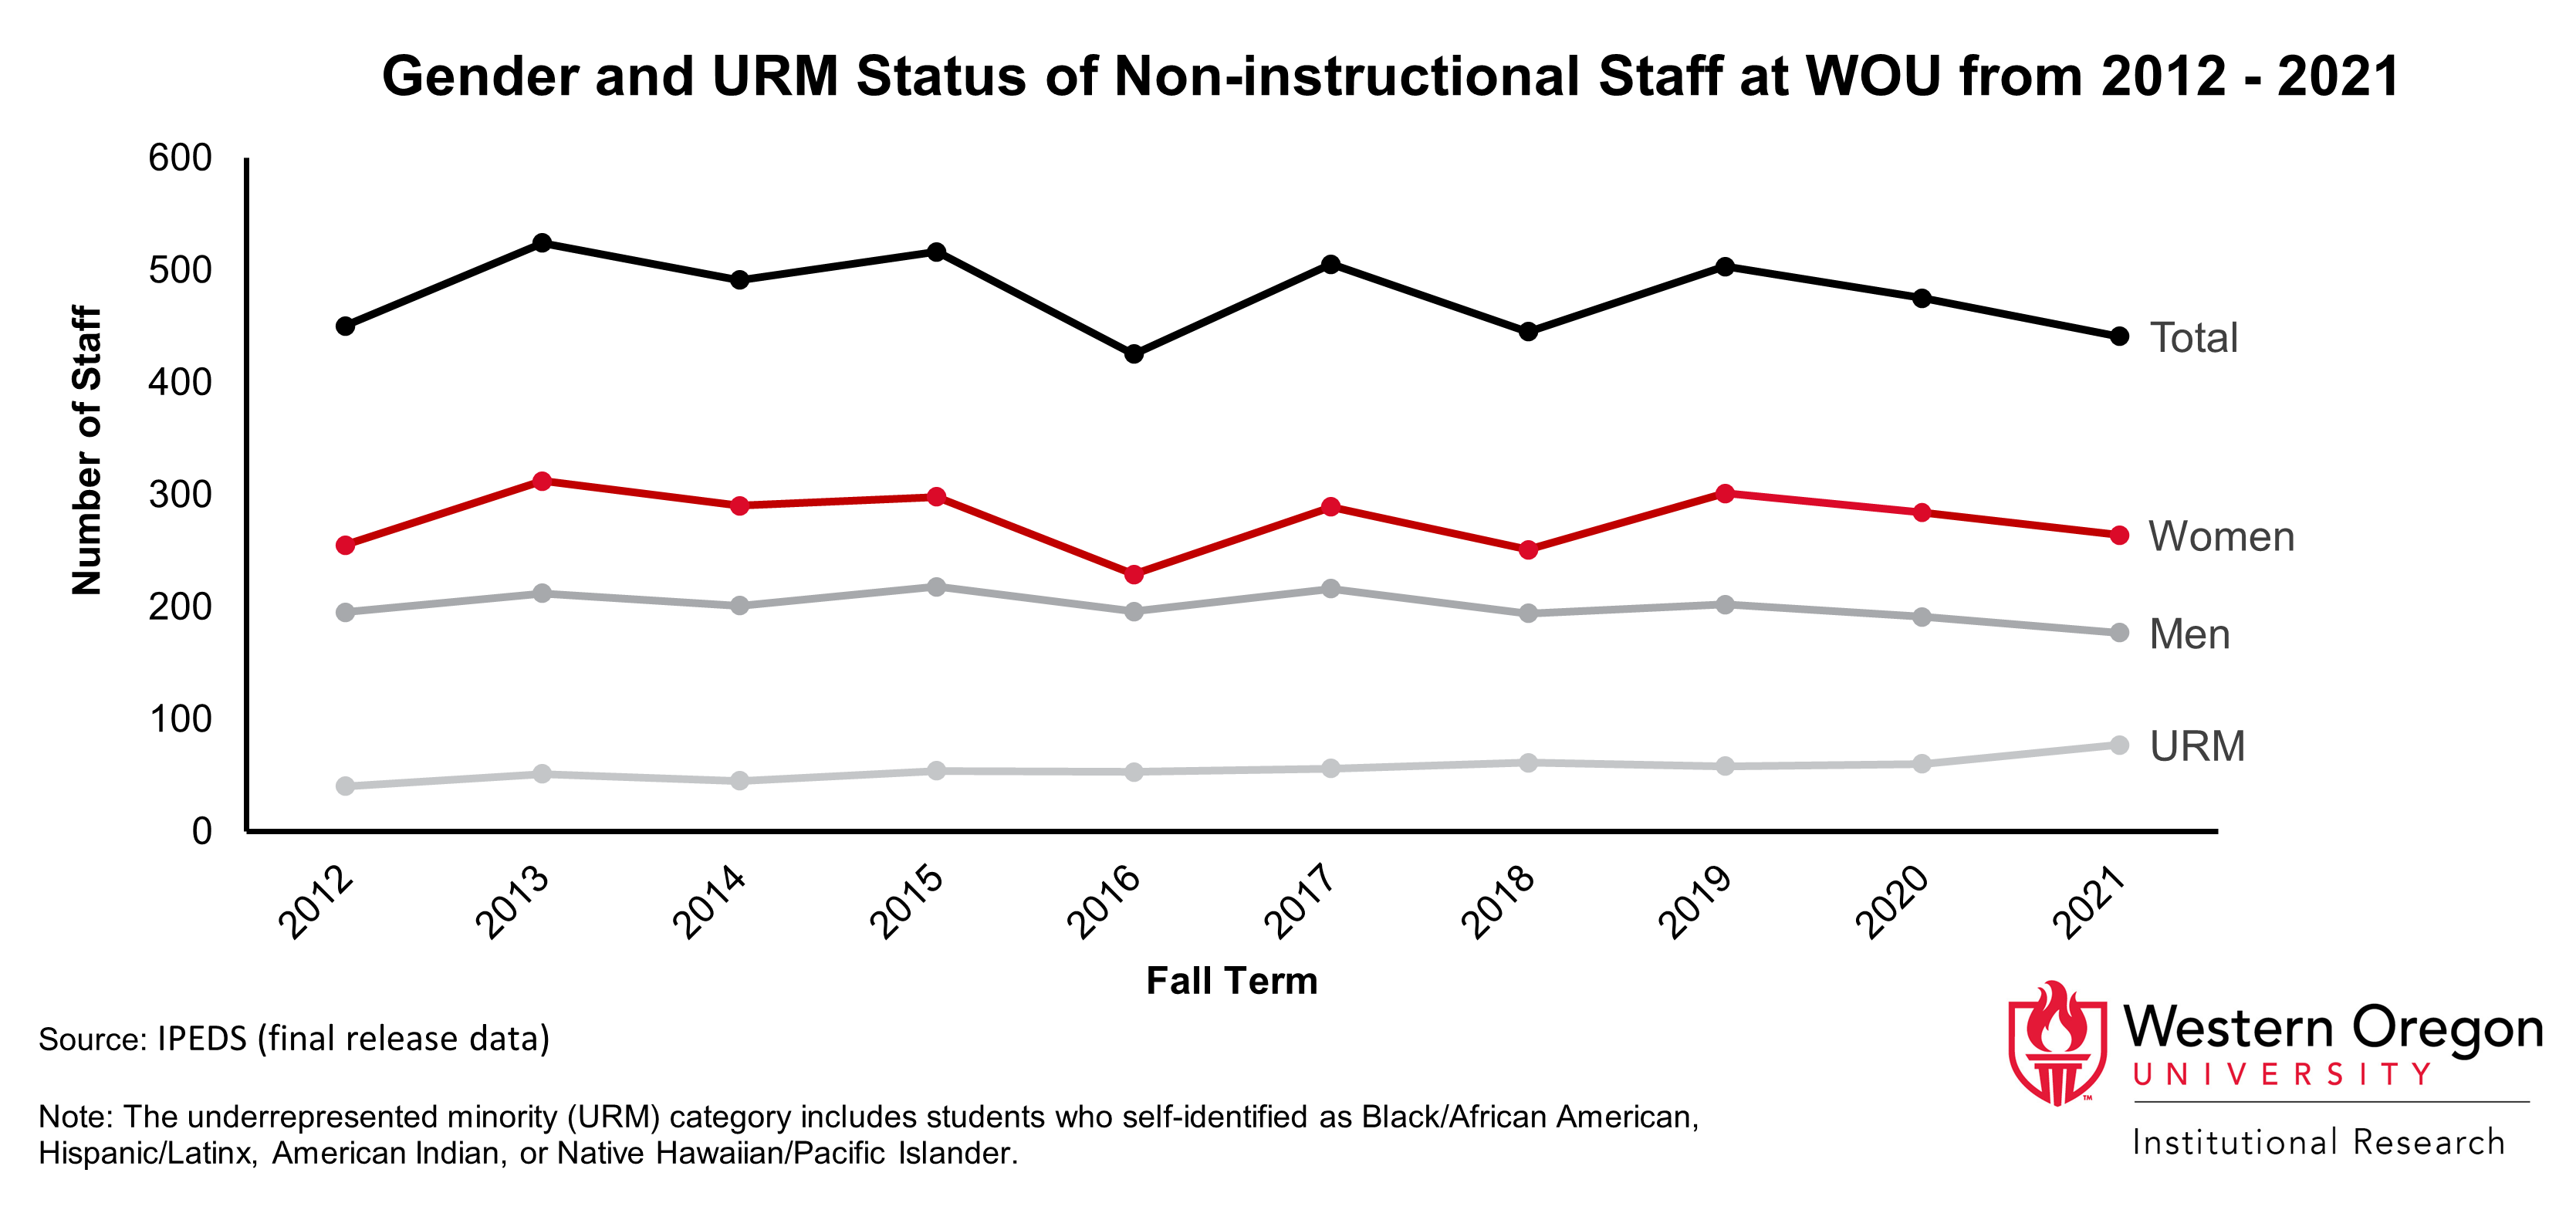 Line graph of counts for staff at WOU since 2012, broken out by gender and URM status, showing that the number of staff and the relative percentages for each gender have remained relatively stable. The percentage of staff that are from an URM group started increasing slightly in 2021.